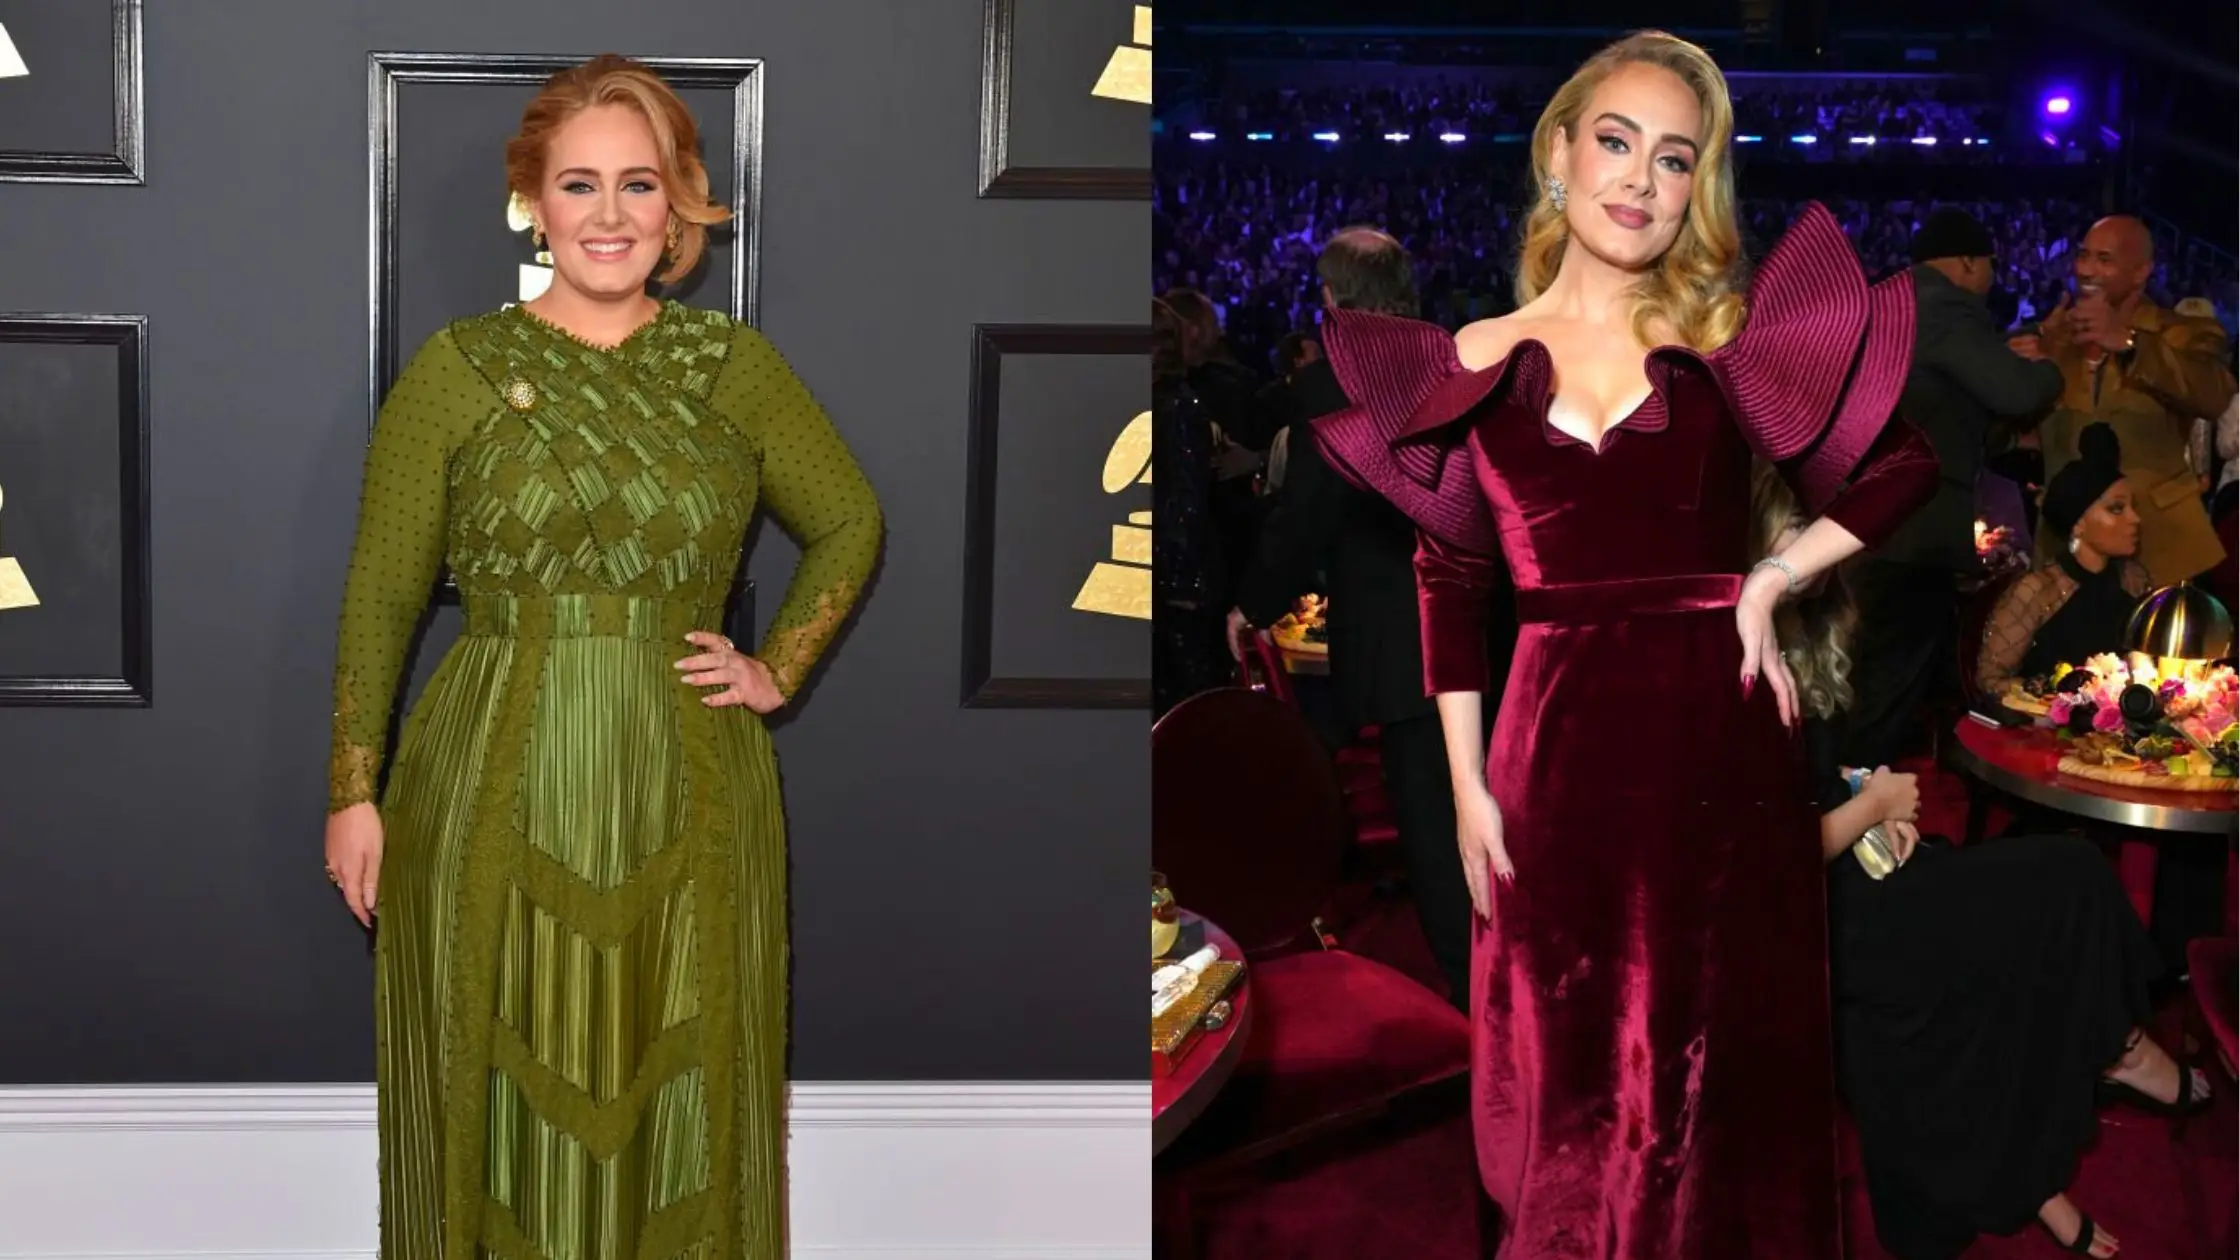 Adele's Weight Loss